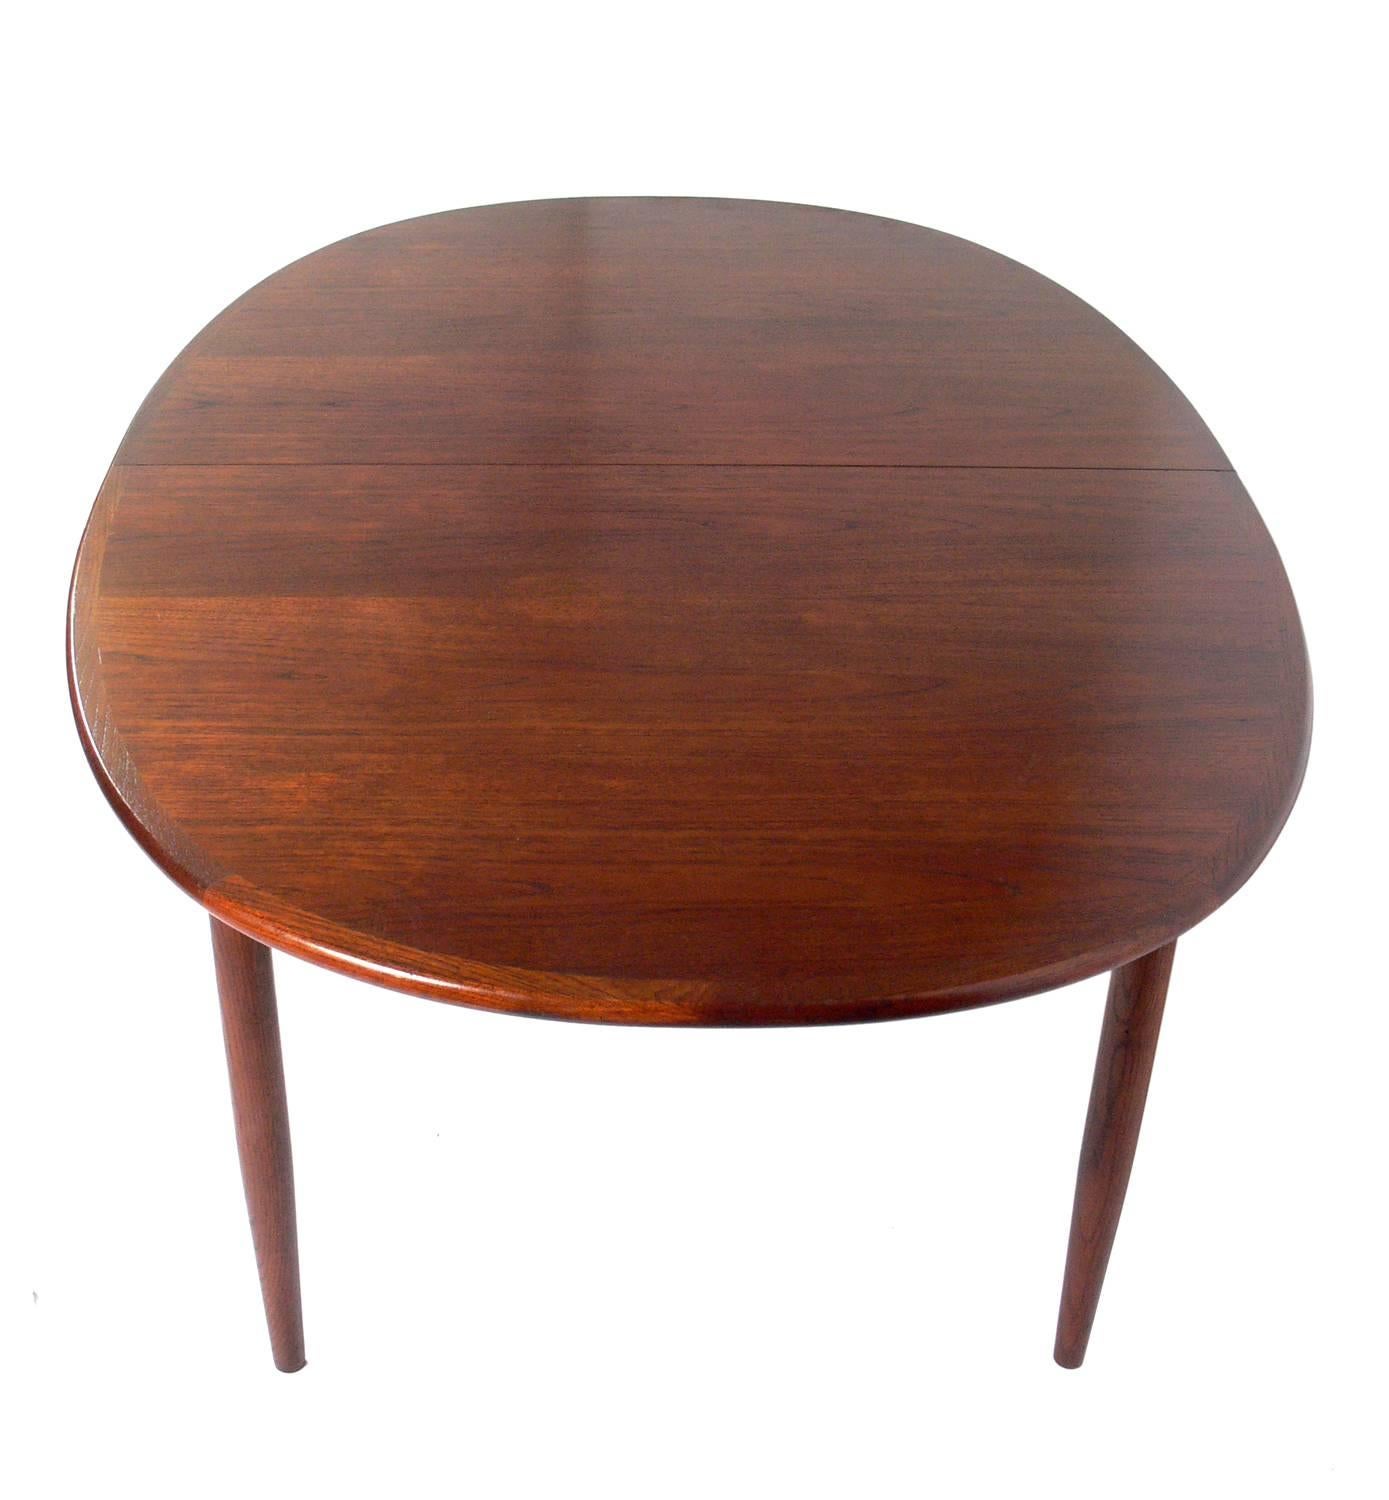 Danish modern teak dining table, Denmark, circa 1960s. The table seats six and can expand to seat twelve with all three leaves installed. It measures an impressive 117